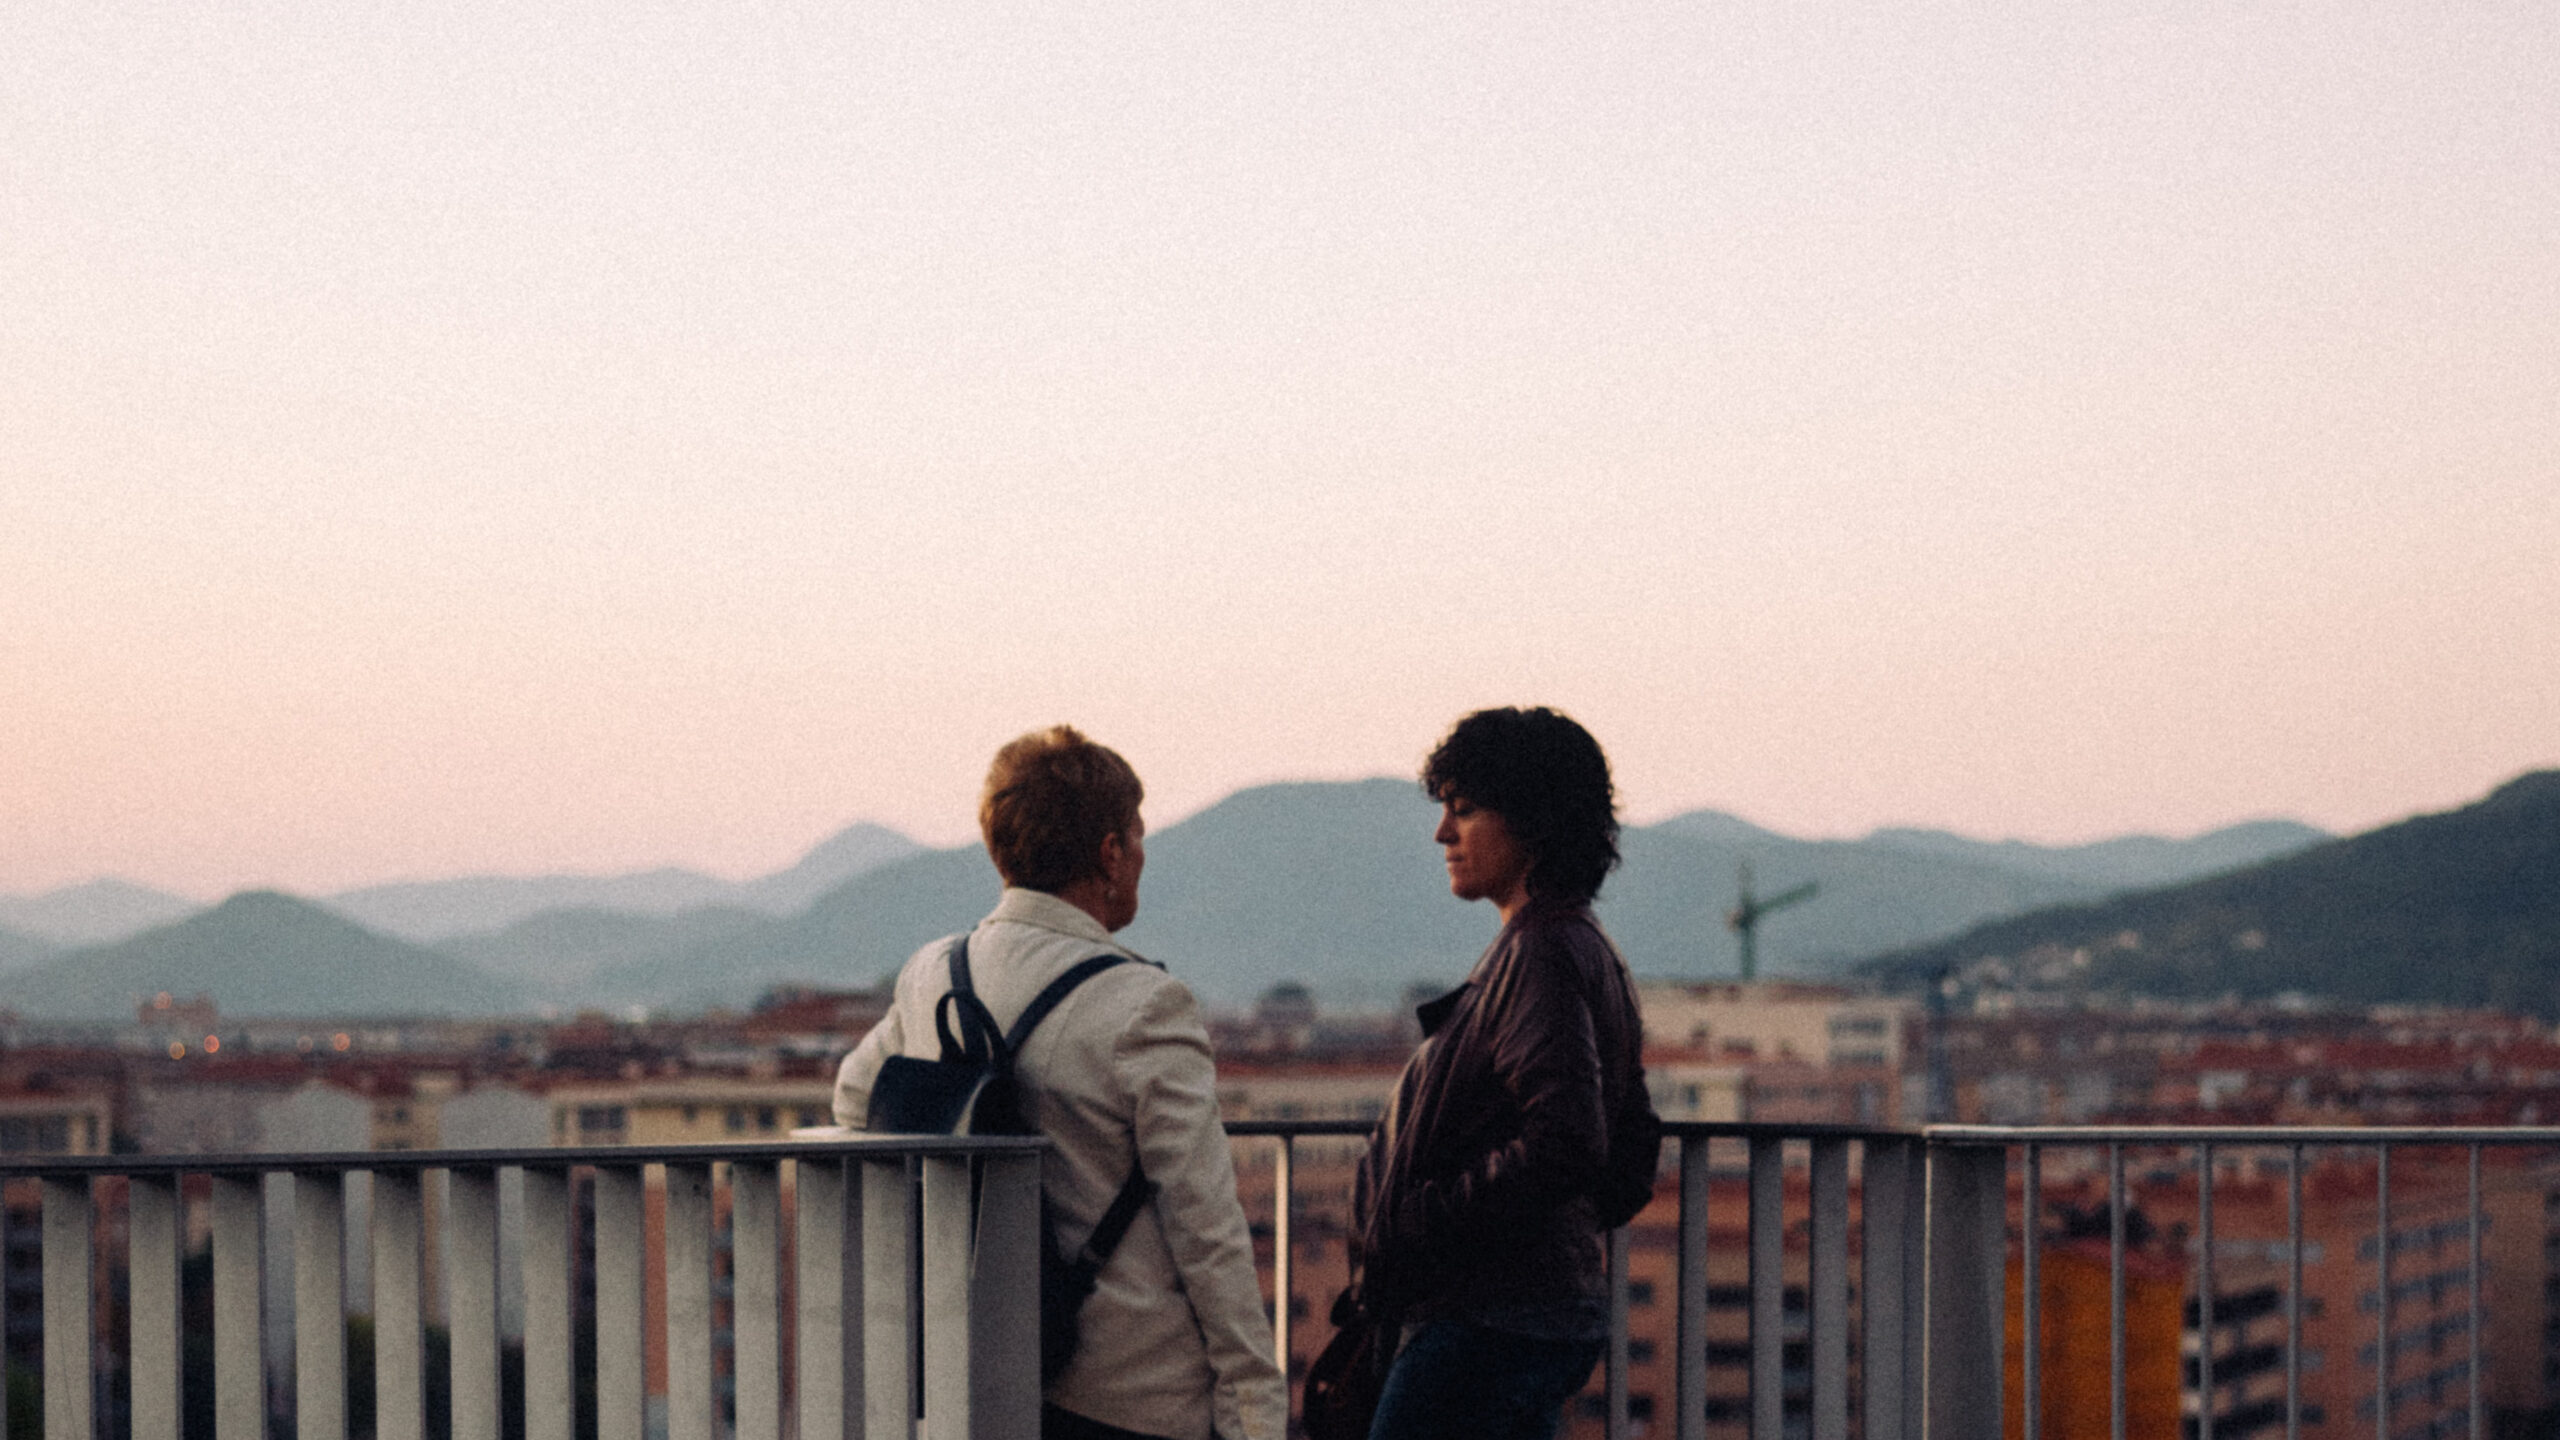 two people talking overlooking a wall and skyline